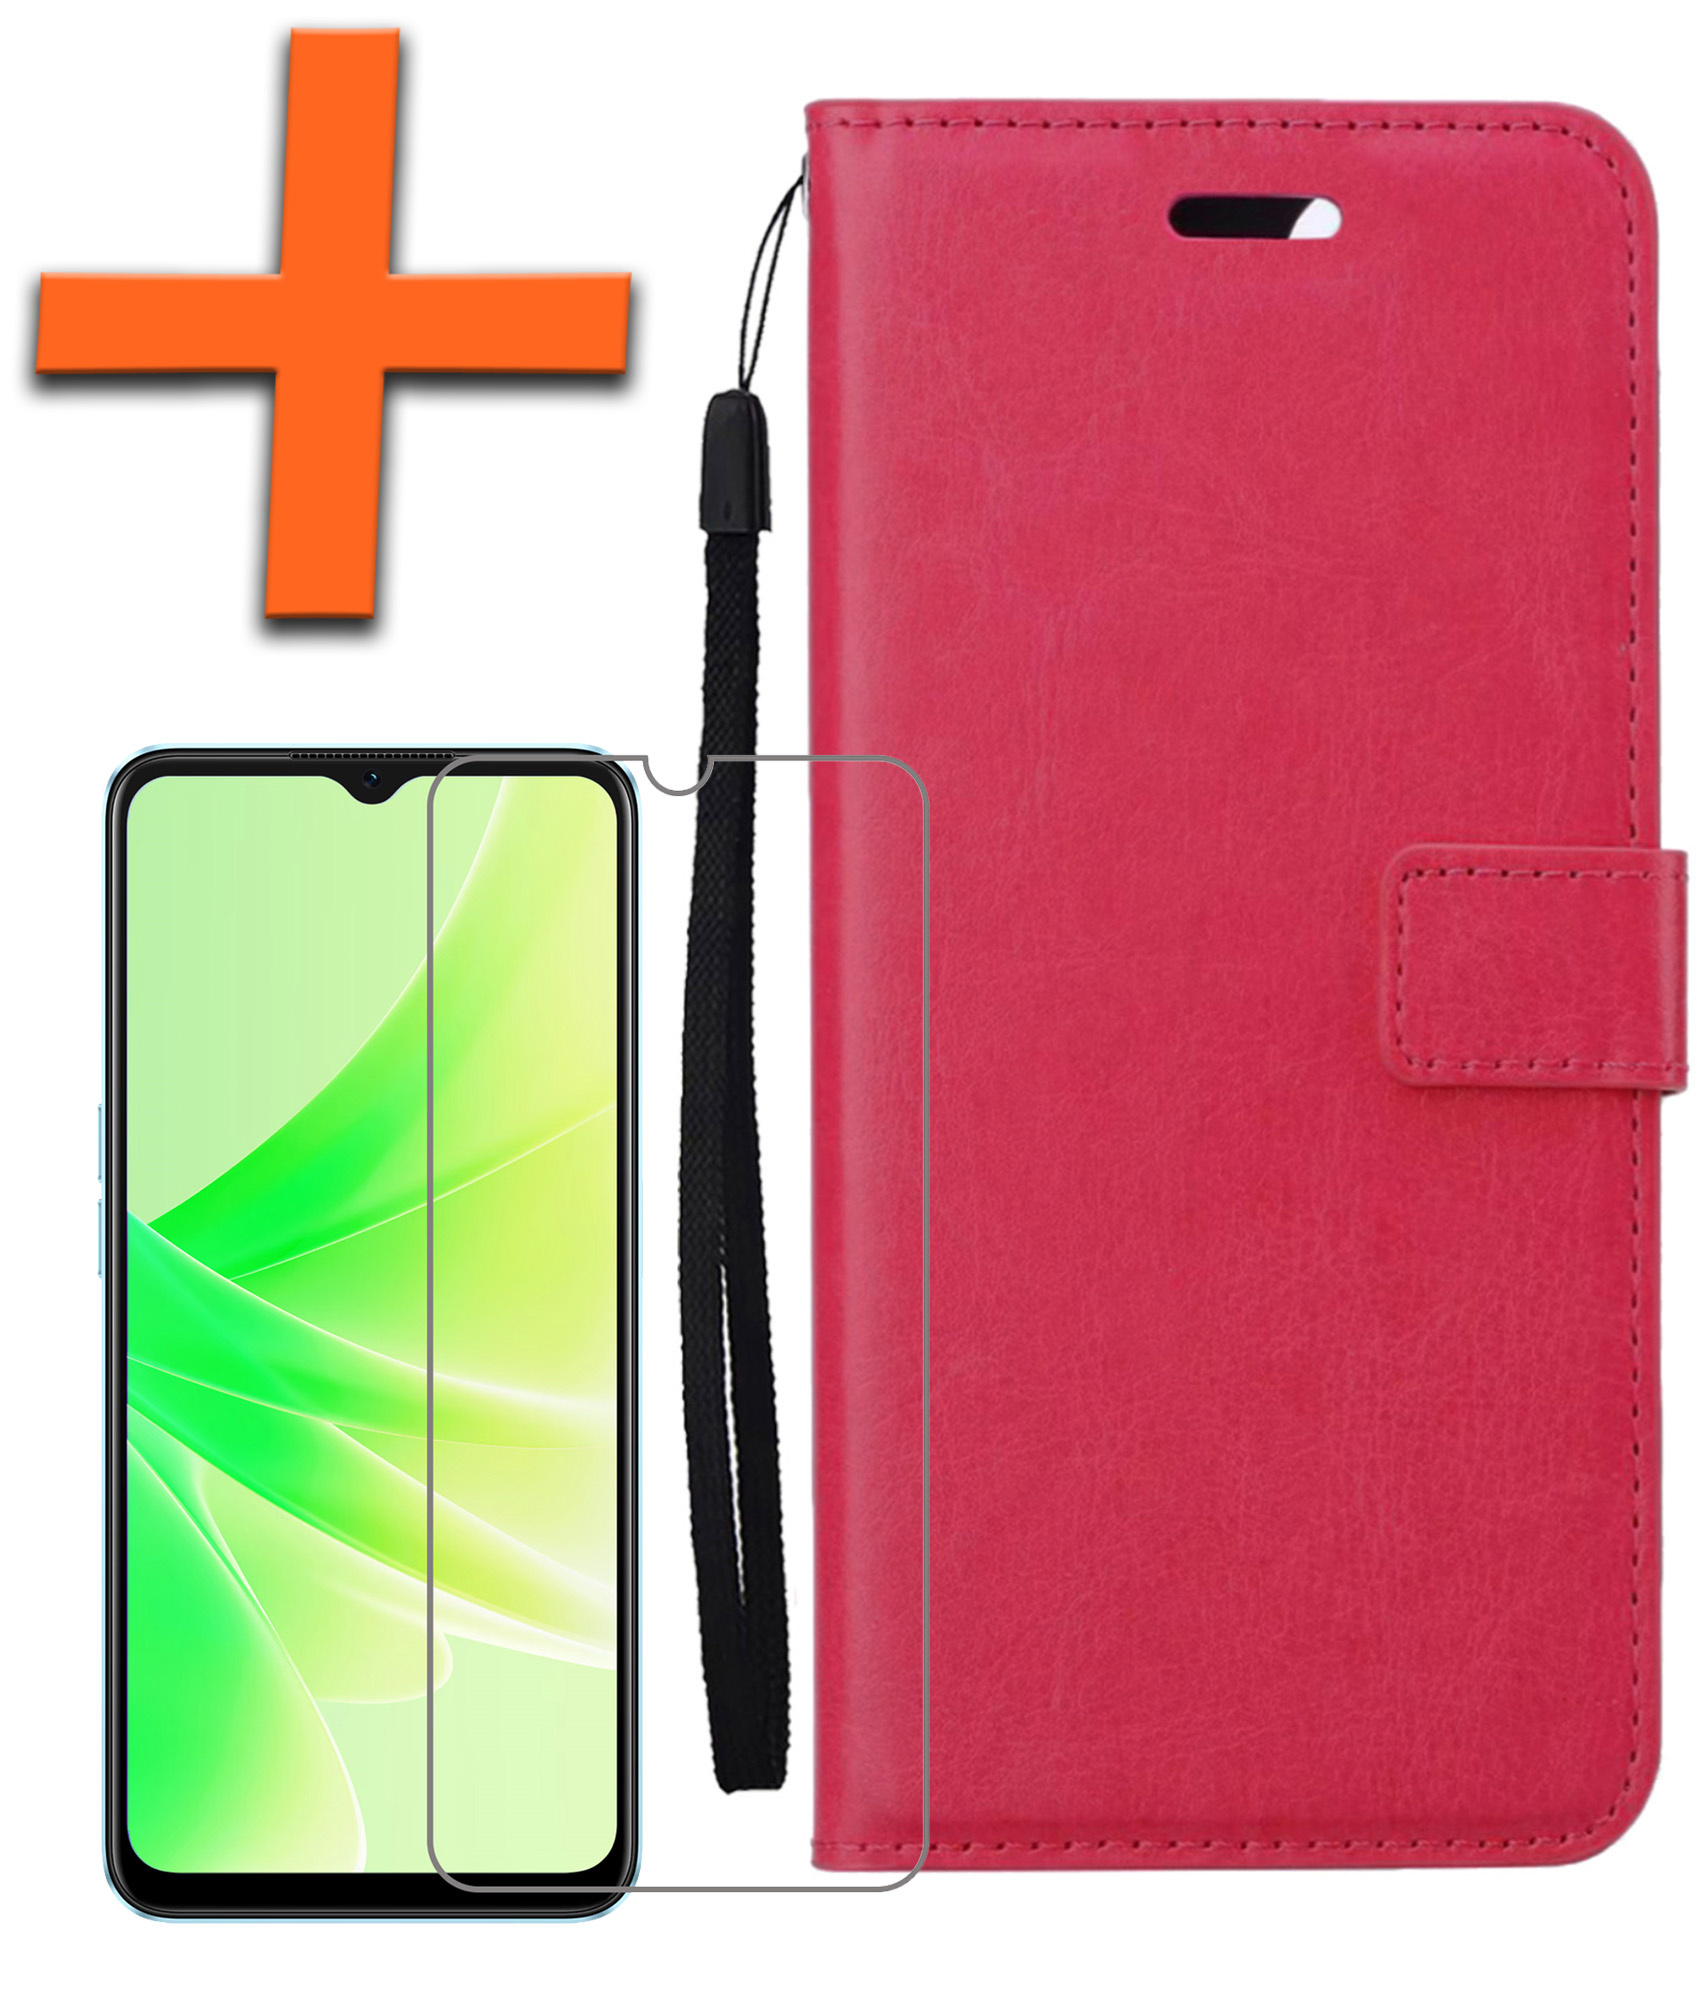 Nomfy OPPO A17 Hoes Bookcase Flipcase Book Cover Met Screenprotector - OPPO A17 Hoesje Book Case - Donker Roze